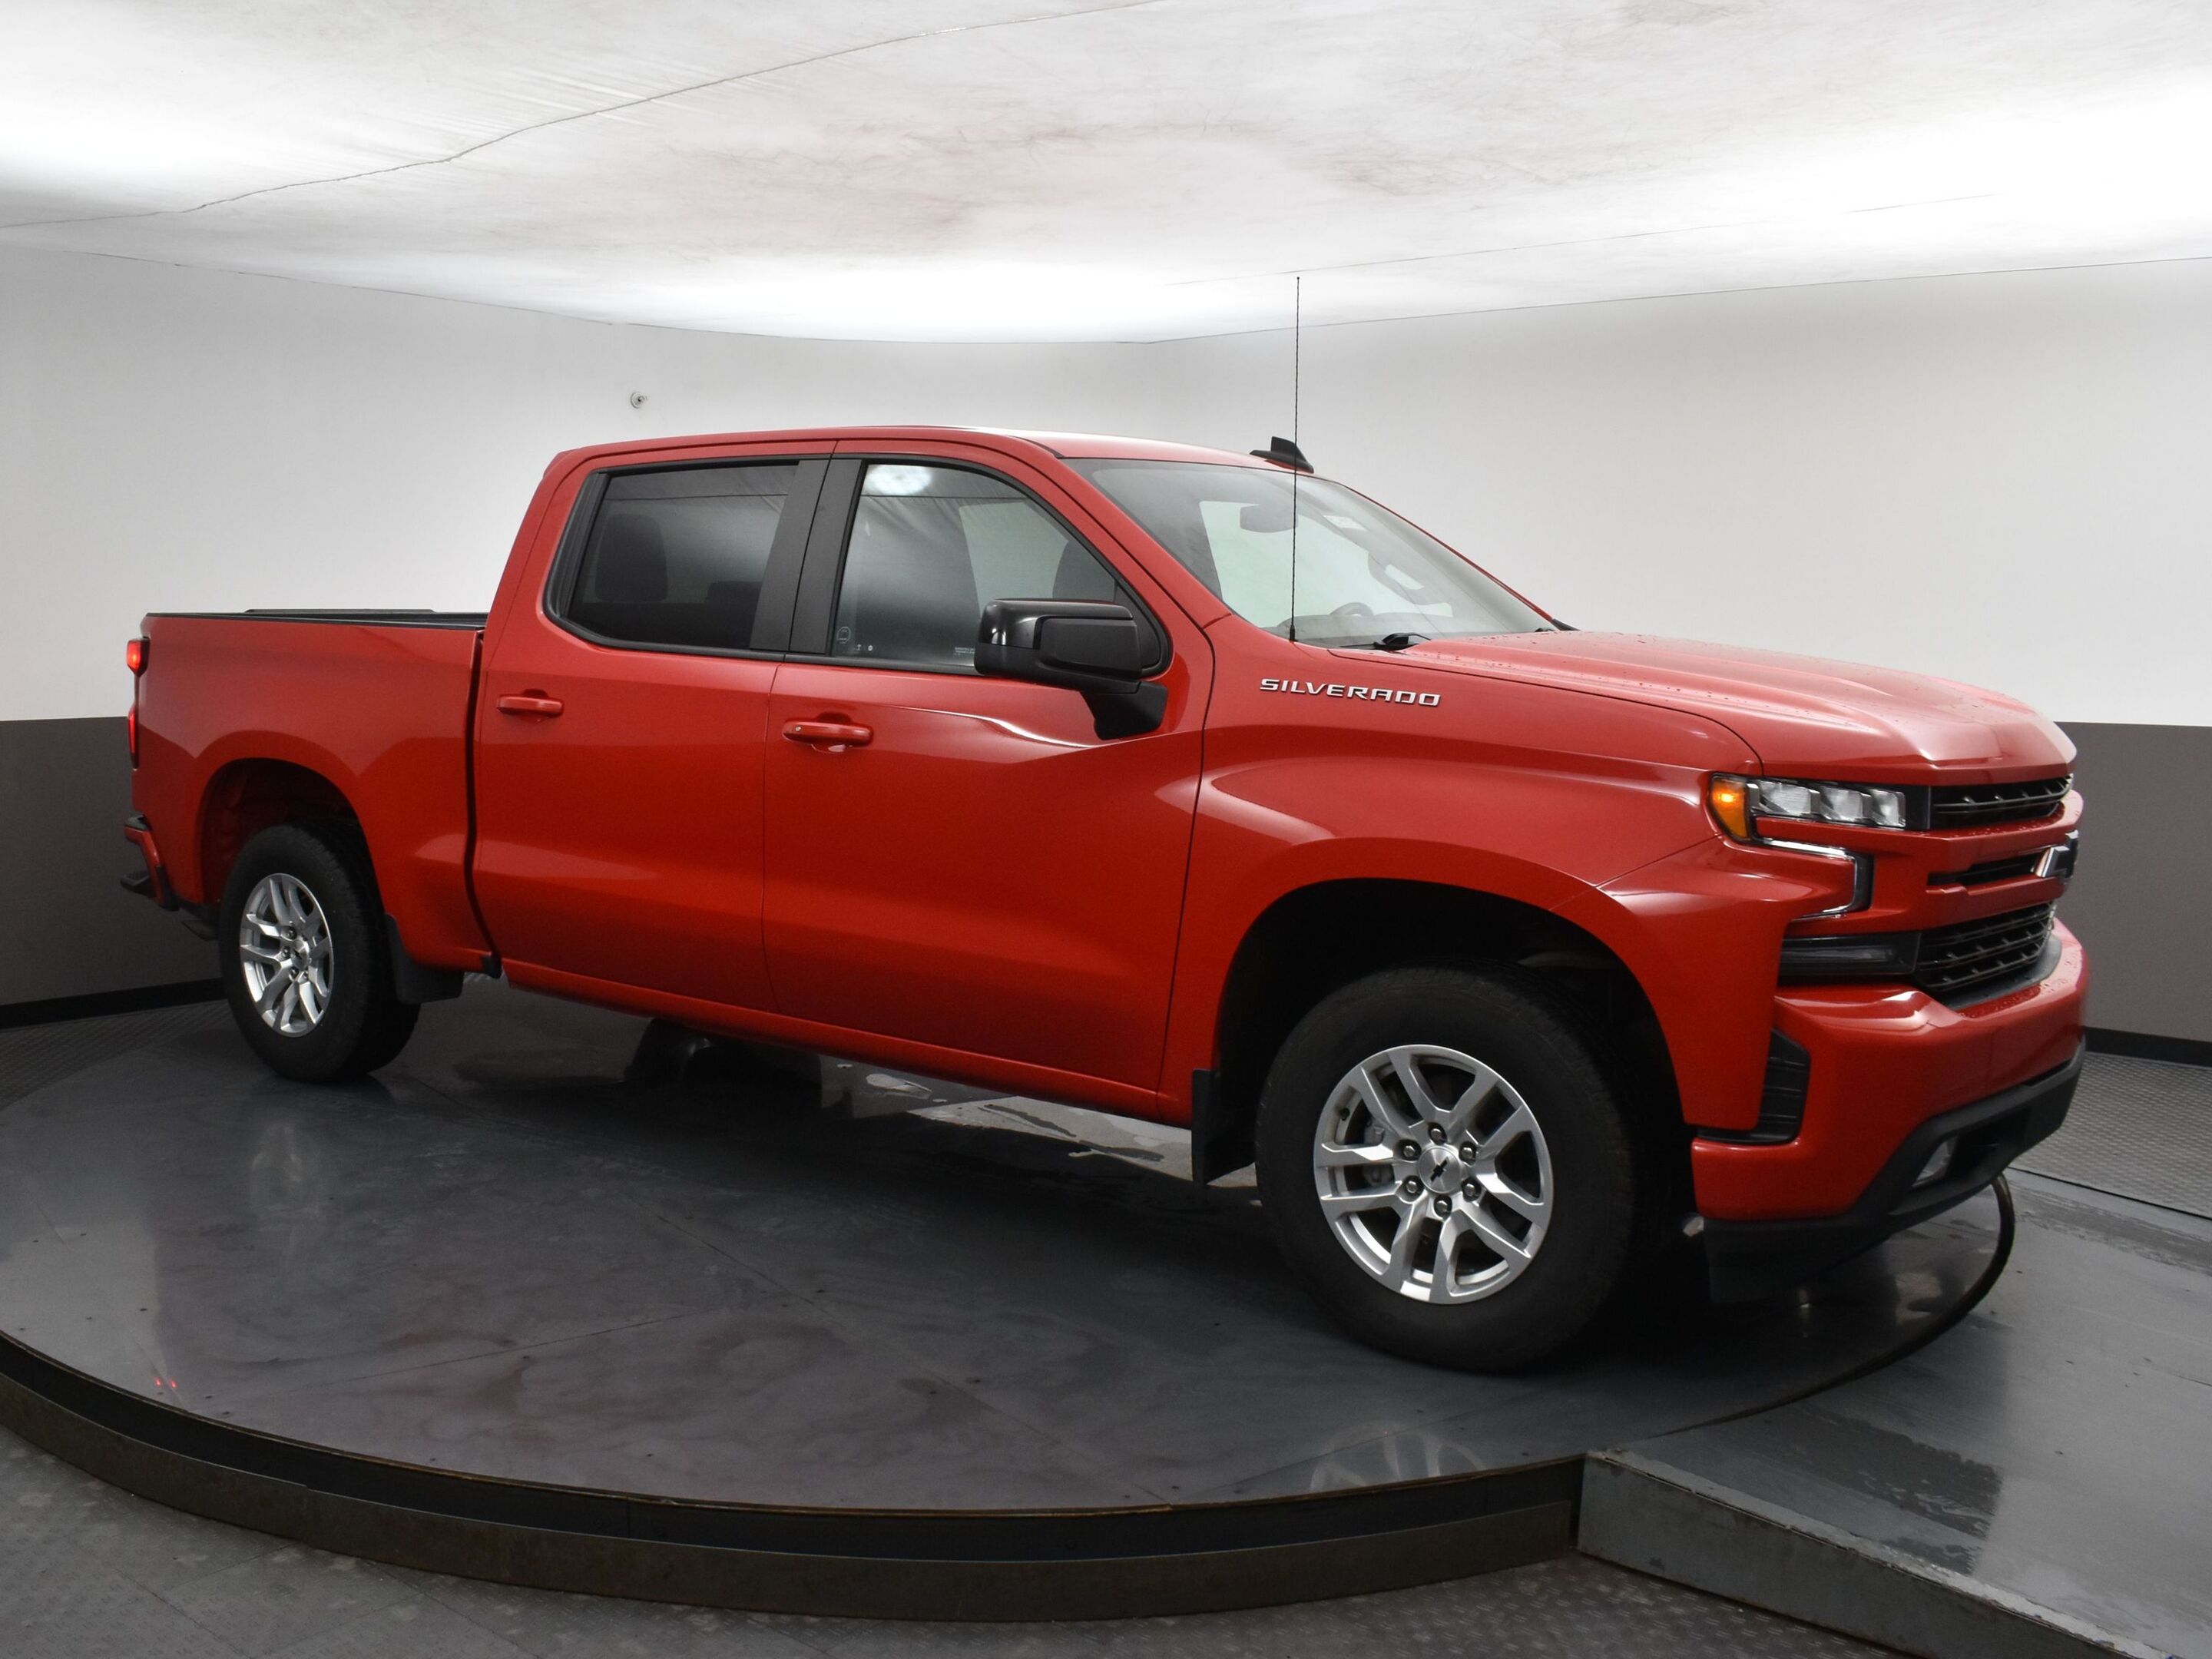 2021 Chevrolet Silverado 1500 RST CREW CAB 4x4 - WAS $46995 NOW $44995 Lease for